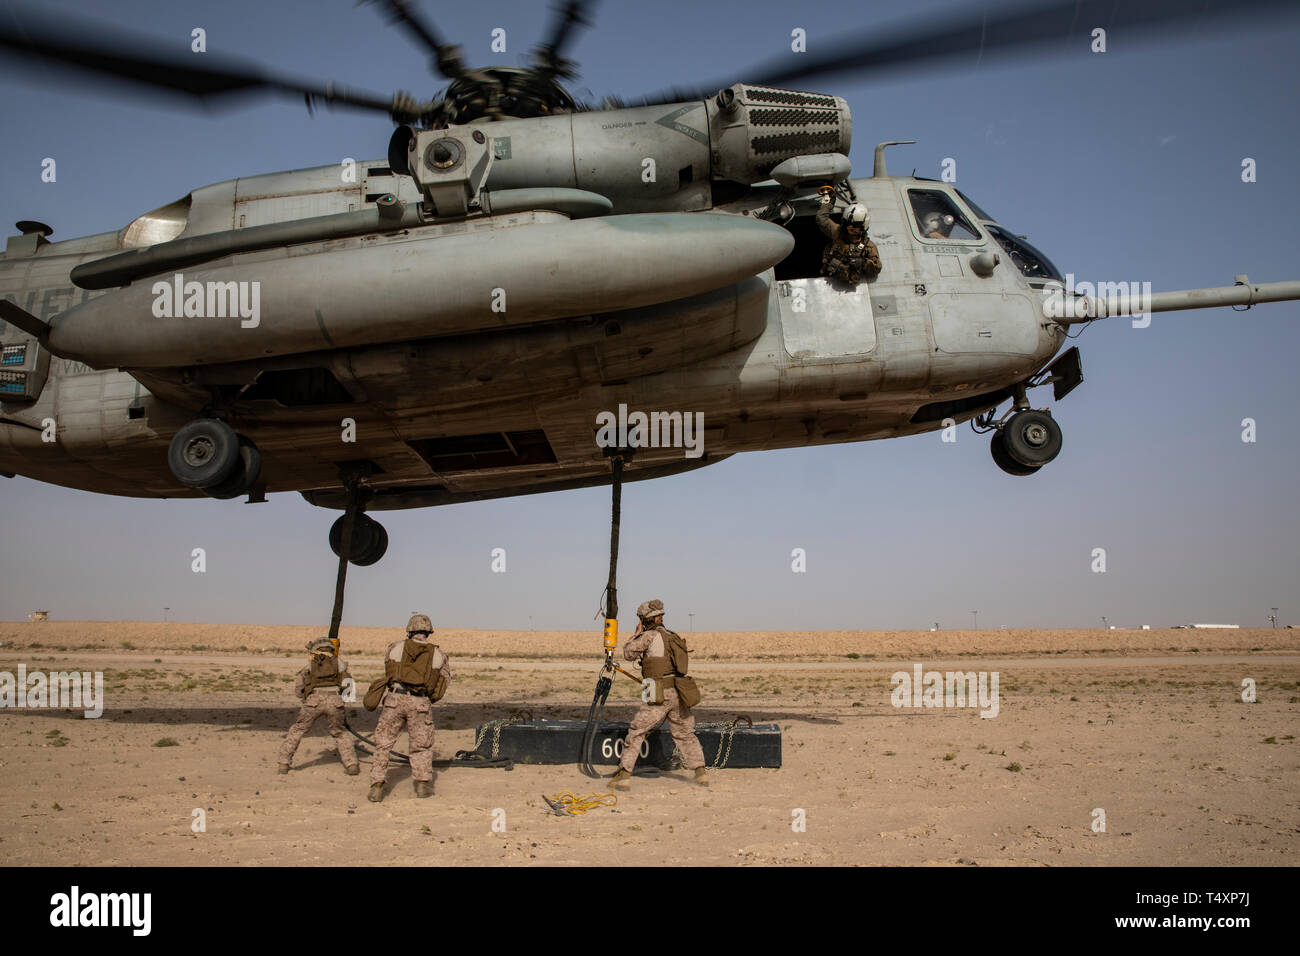 CAMP BEUHRING, Kuwait (April 11, 2019) A U.S. Marine CH-53E Super Stallion hovers while landing support specialists with the 22nd Marine Expeditionary Unit hook a 6,000 pound beam as part of helicopter support team training during Marine Expeditionary Unit Exercise. The Marines, with Marine Medium Tiltrotor Squadron 264 (Reinforced) and Combat Logistics Battalion 22, participated the training to build and sharpen their skills in order to maintain combat readiness. Marines and Sailors with the 22nd MEU and Kearsarge Amphibious Ready Group are currently deployed to the U.S. 5th Fleet area of ope Stock Photo